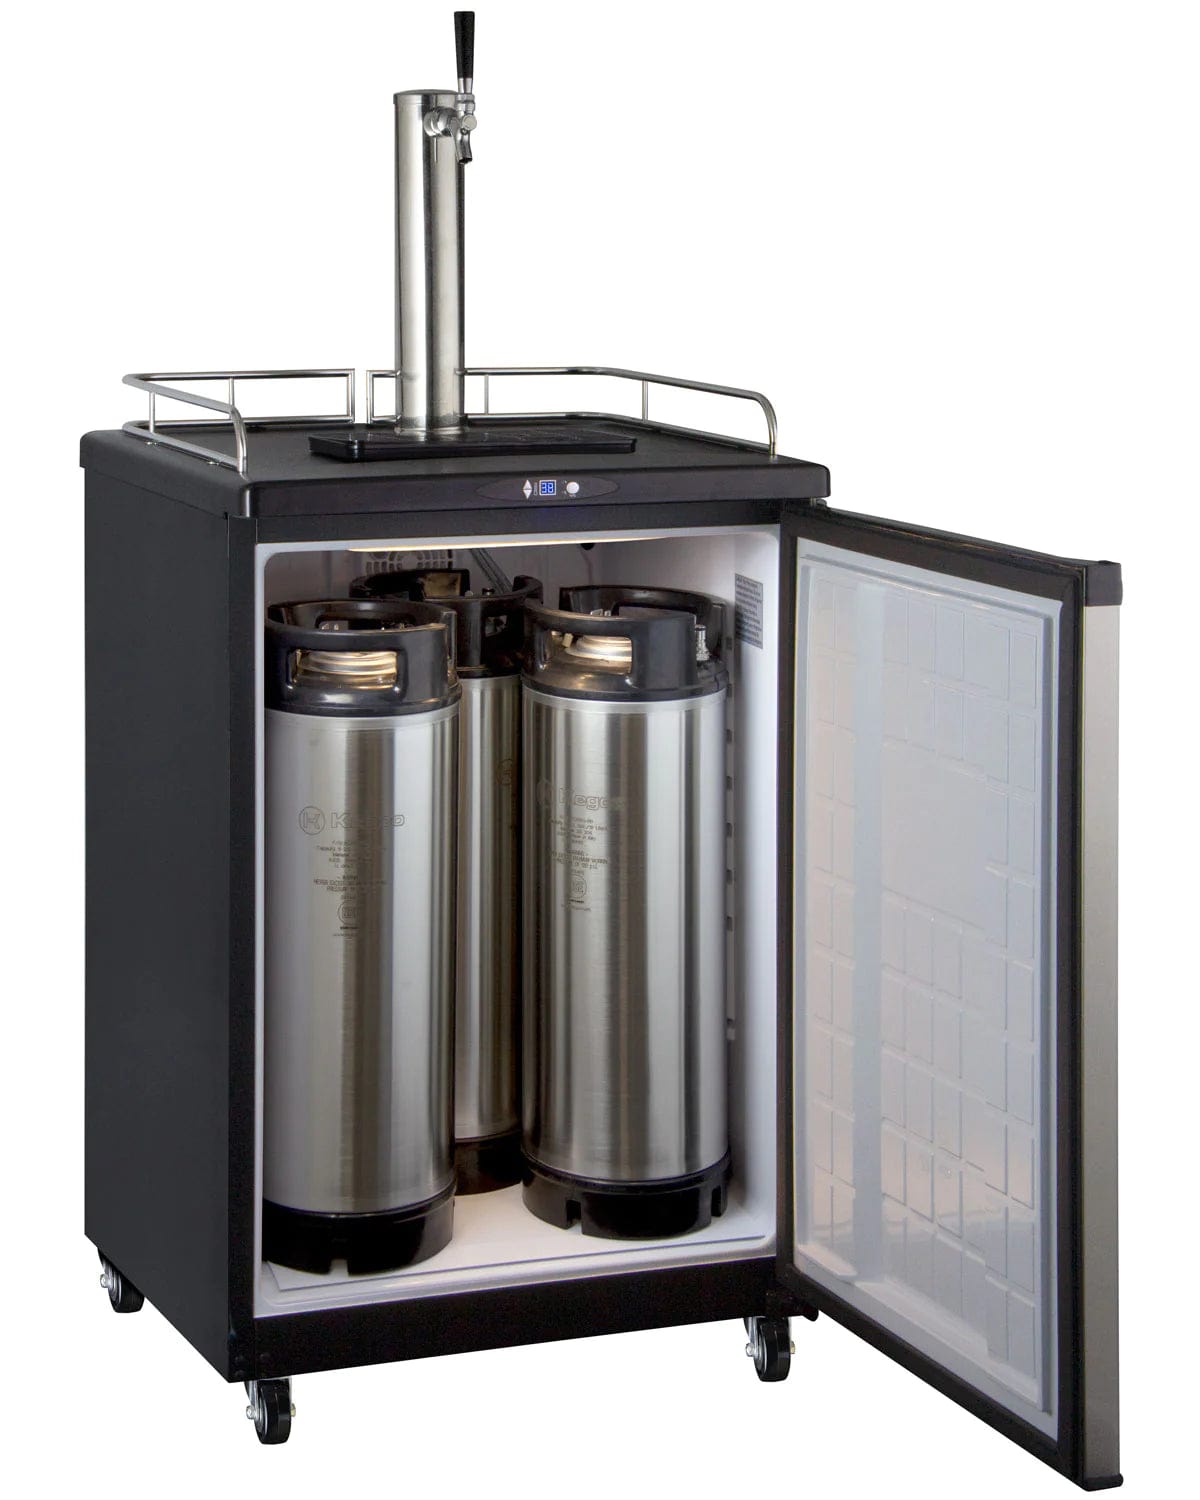 KEGCO Kegerator KEGCO 24 Wide Cold Brew Coffee Stainless Steel Commercial/Residential Kegerator-ICZ163S